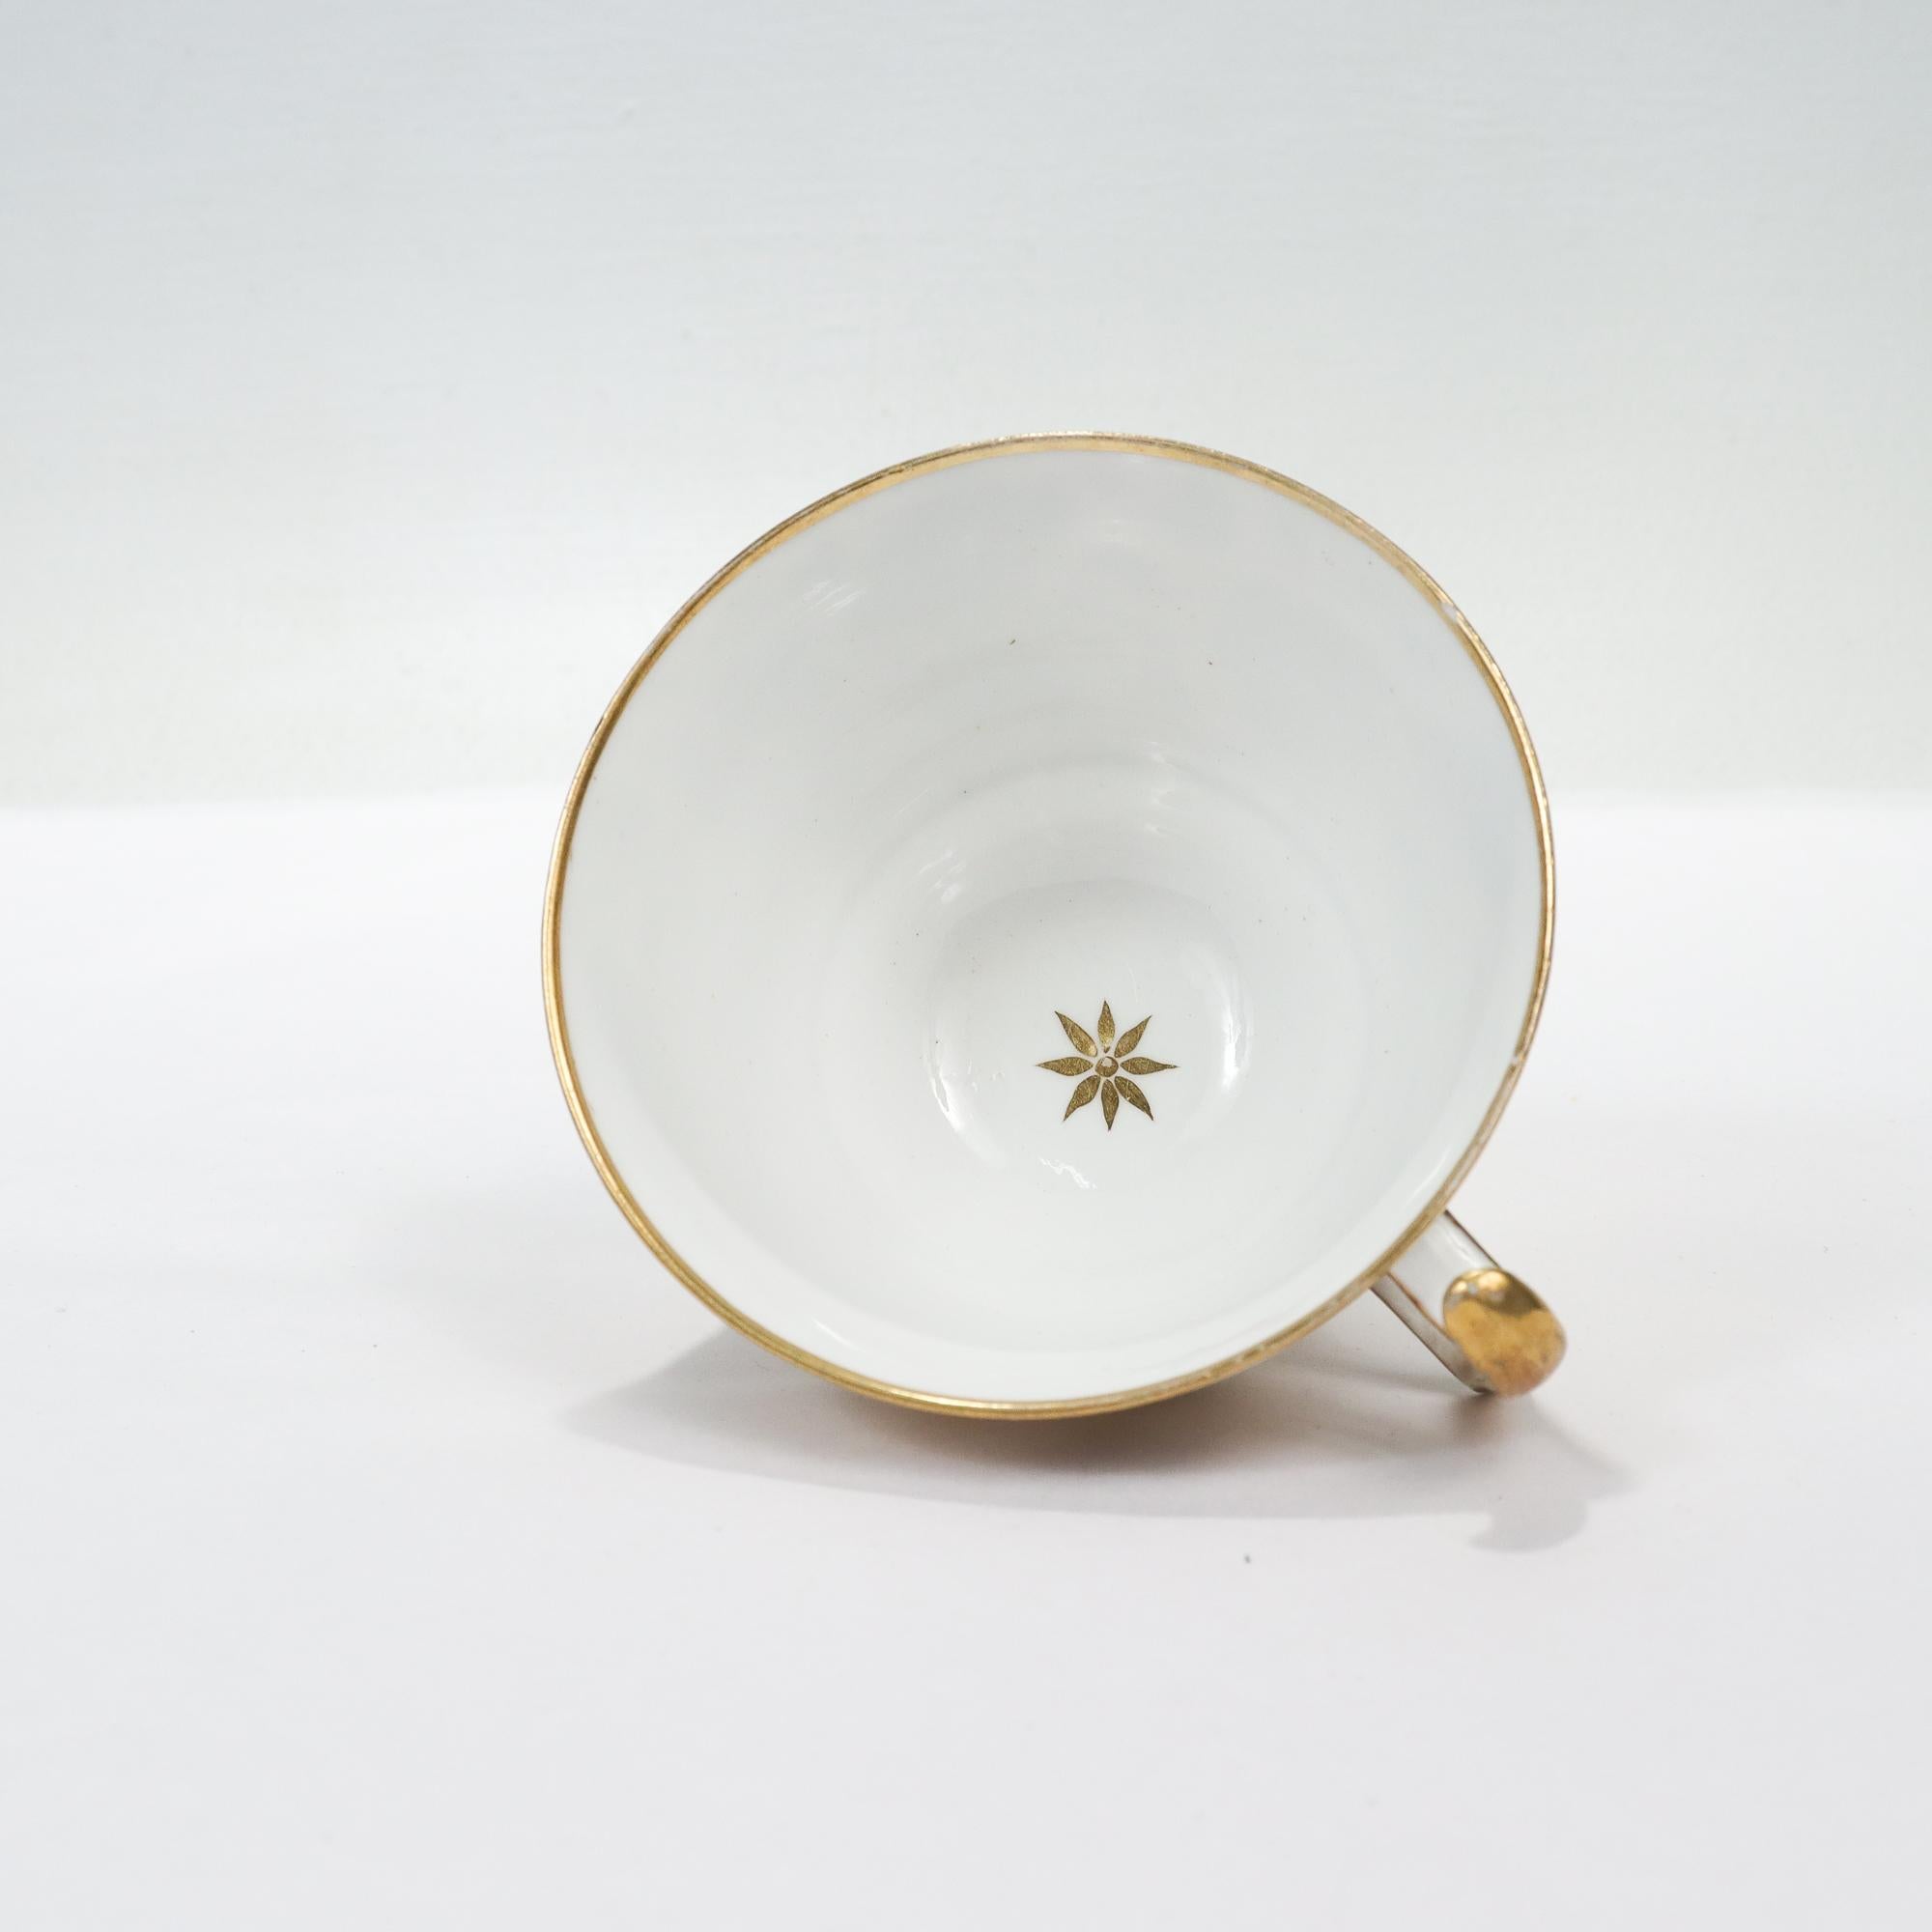 Antique Early 19th Century Spode Porcelain Pattern Number 2408 Tea Cup & Saucer In Good Condition For Sale In Philadelphia, PA